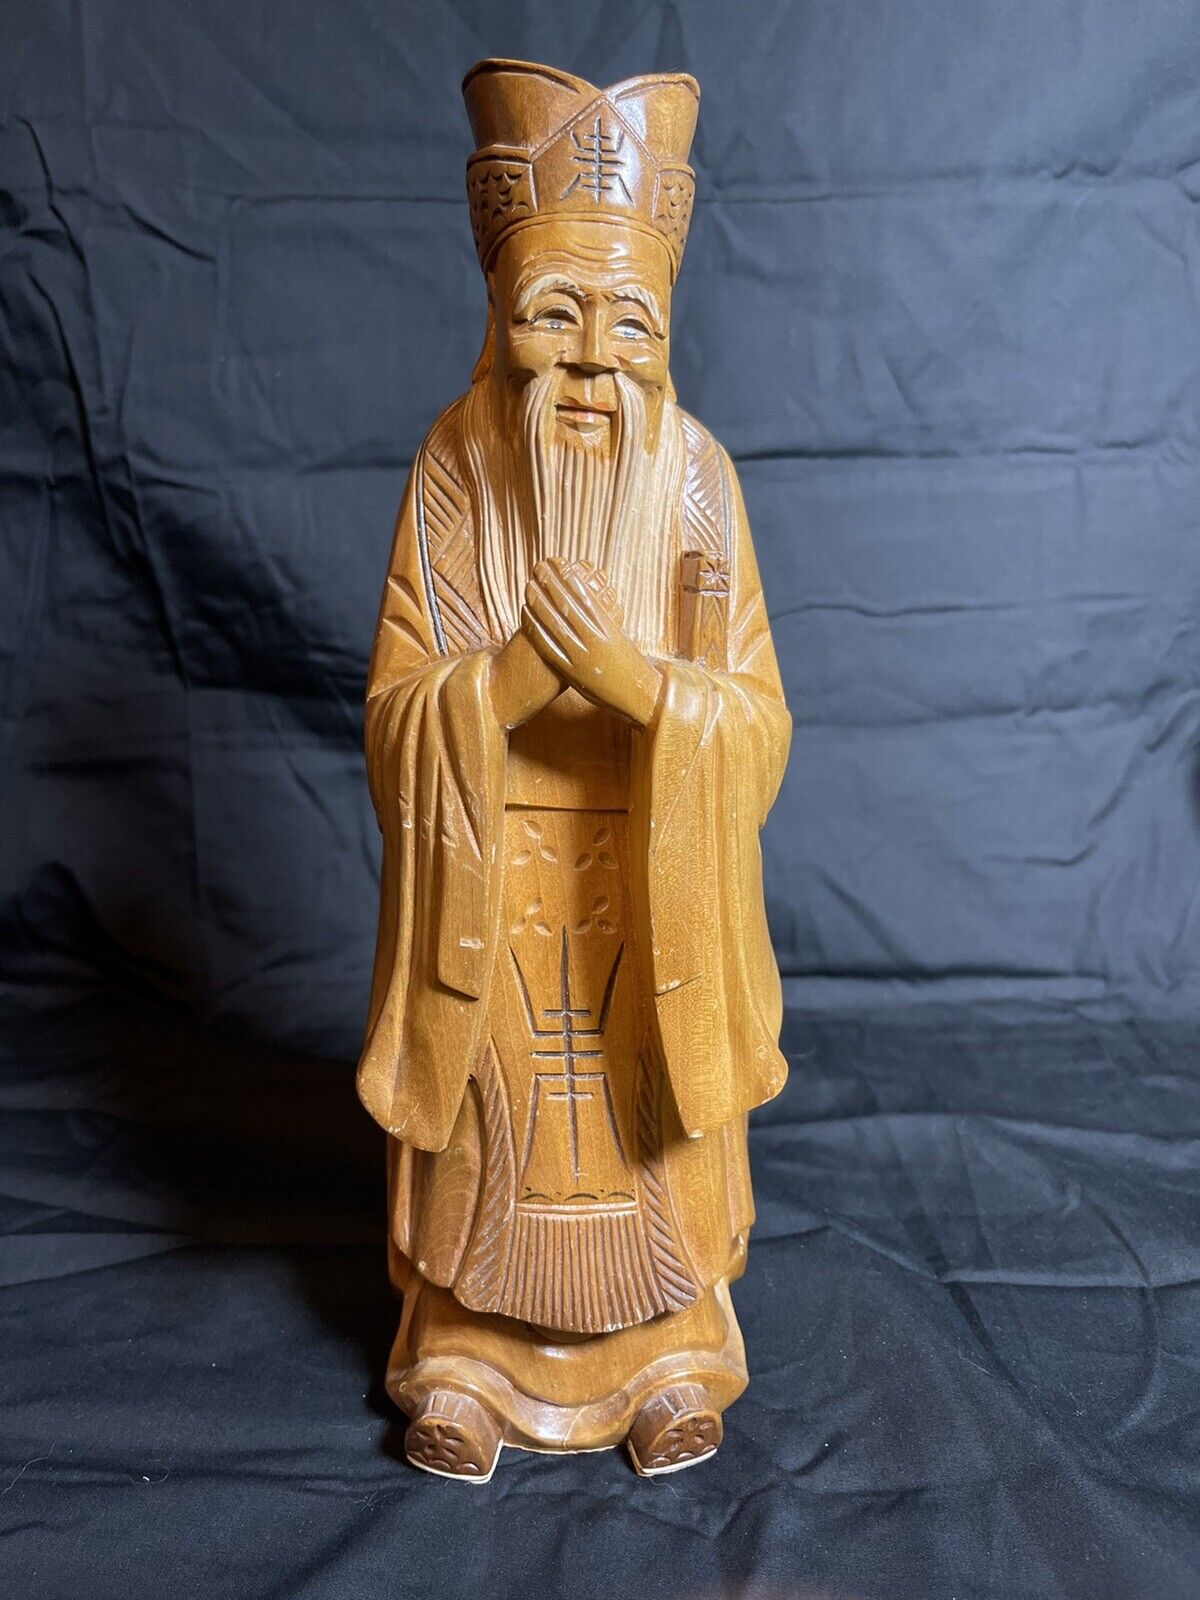 Antique Valuations: Vintage Monk Chinese/ Japan 11" Olive Wooden Hand Carved Old Monk Man Statue